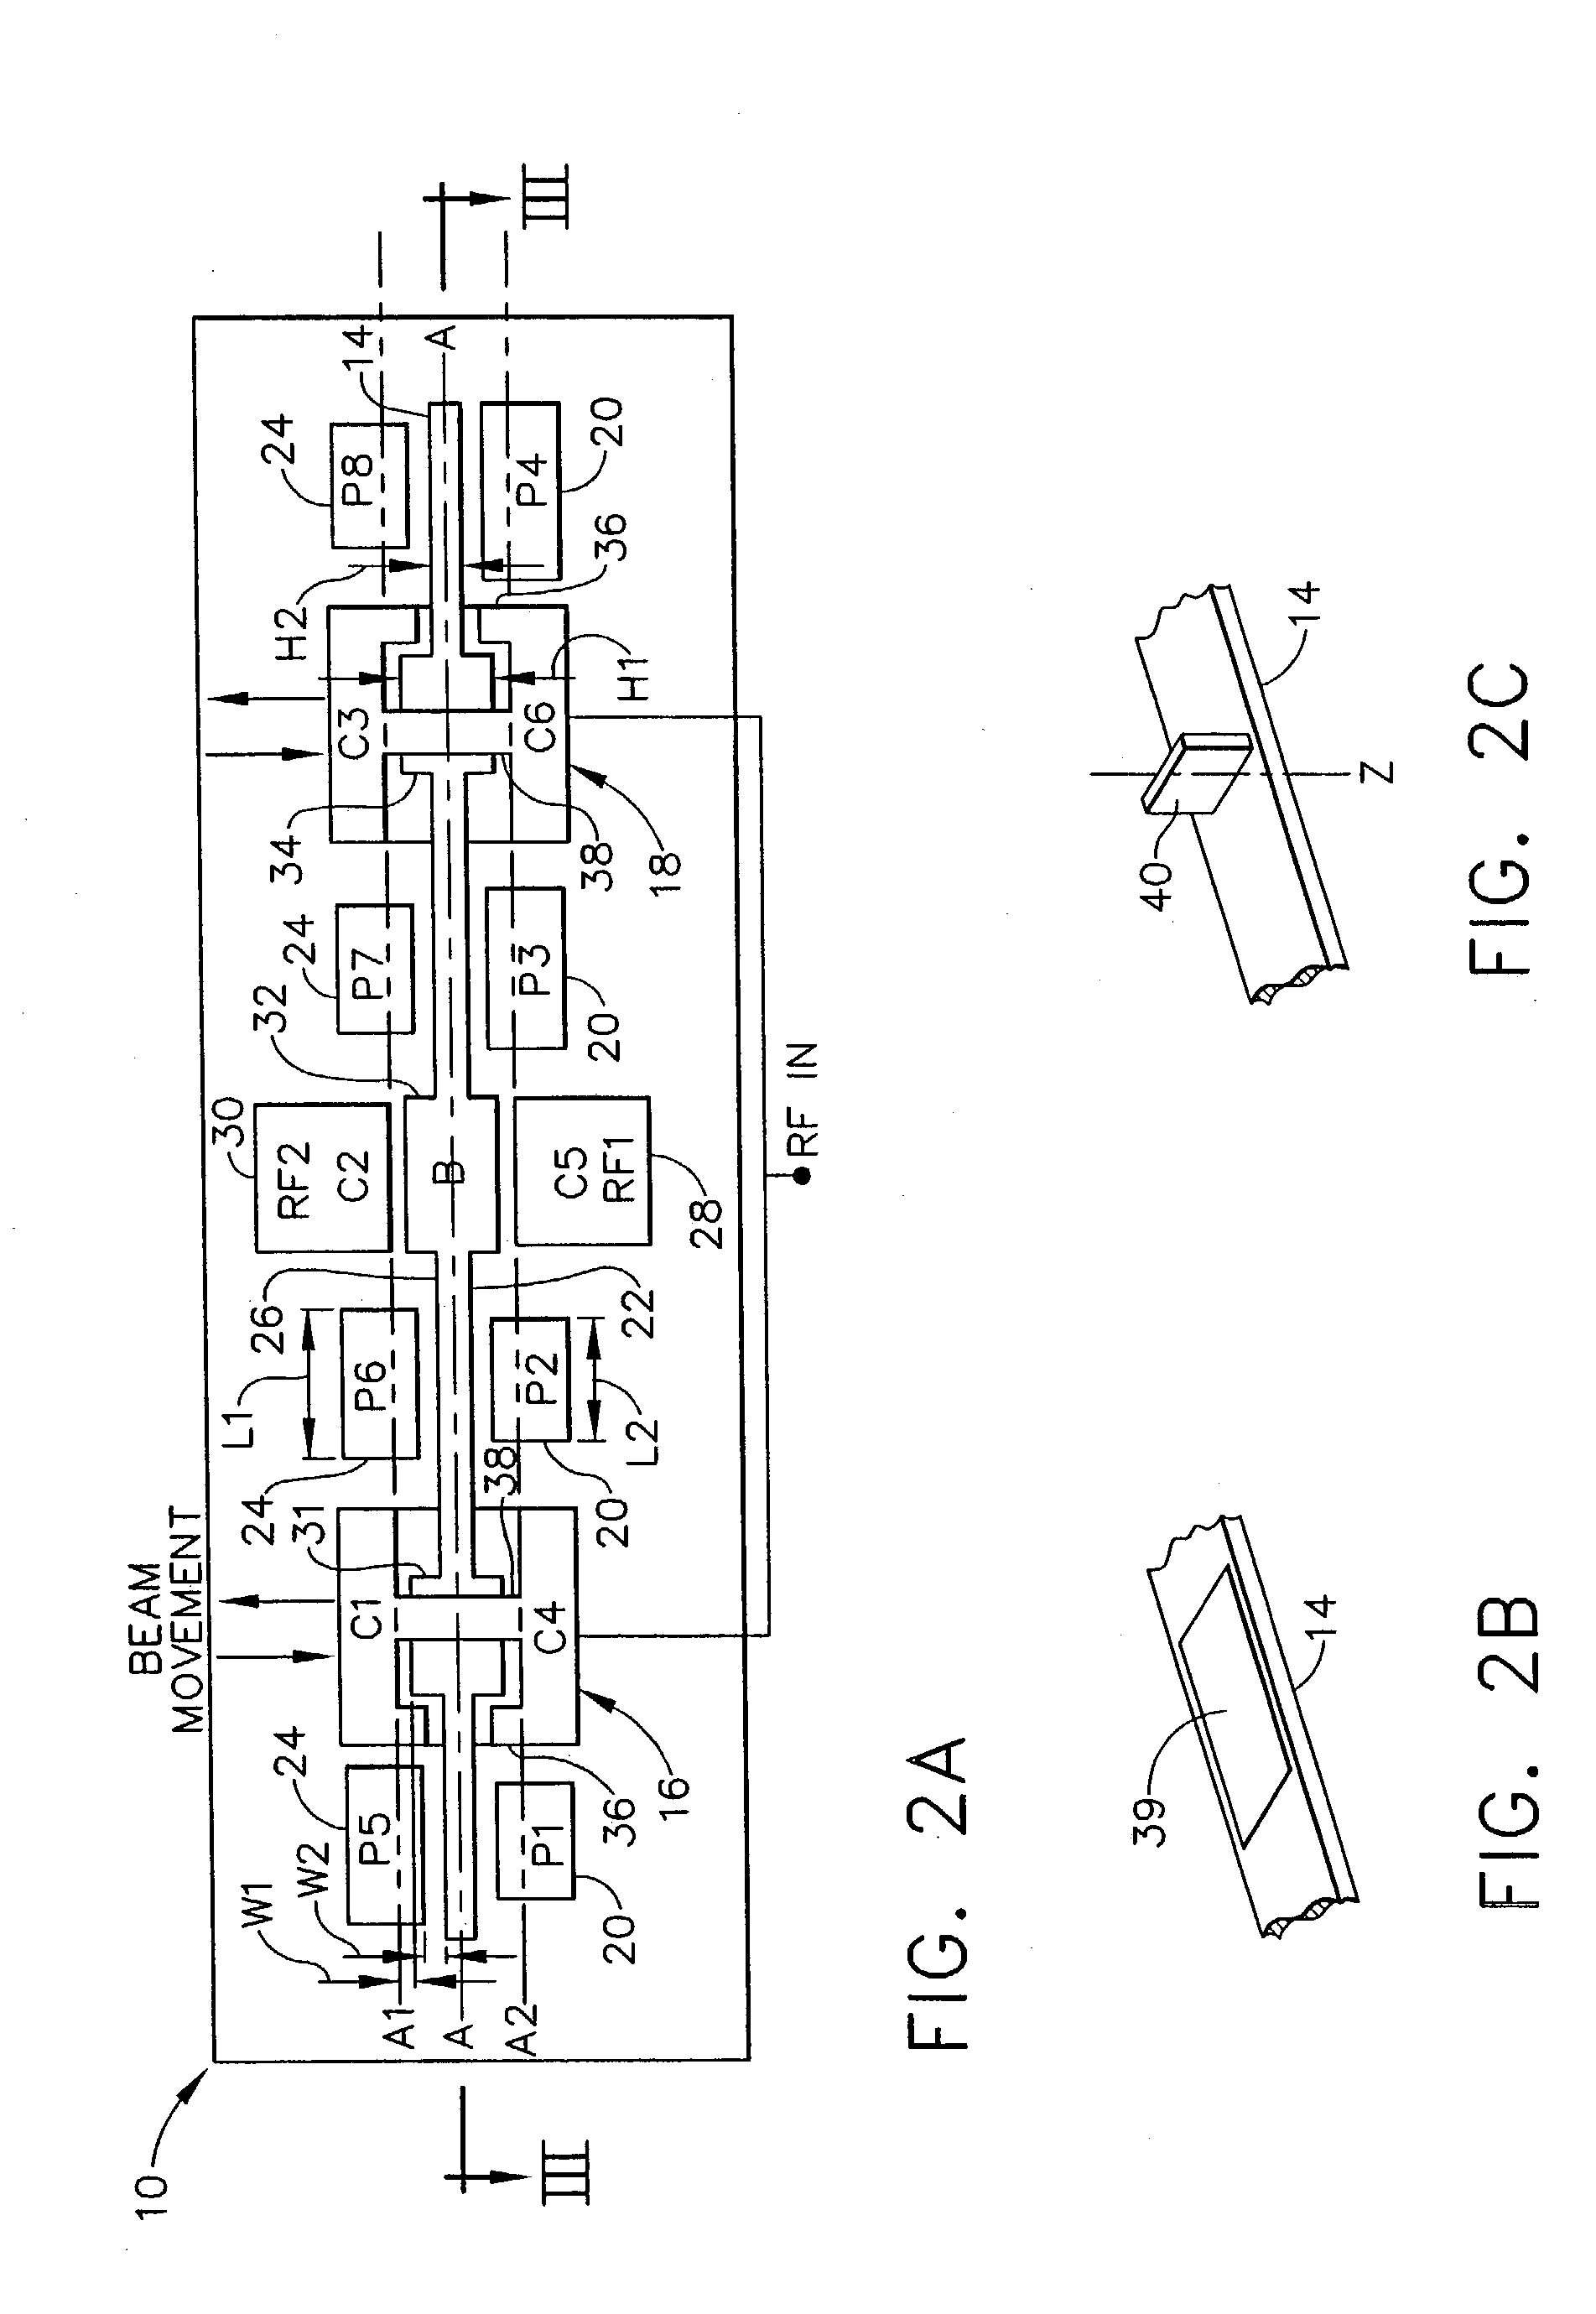 Anchorless electrostatically activated micro electromechanical system switch